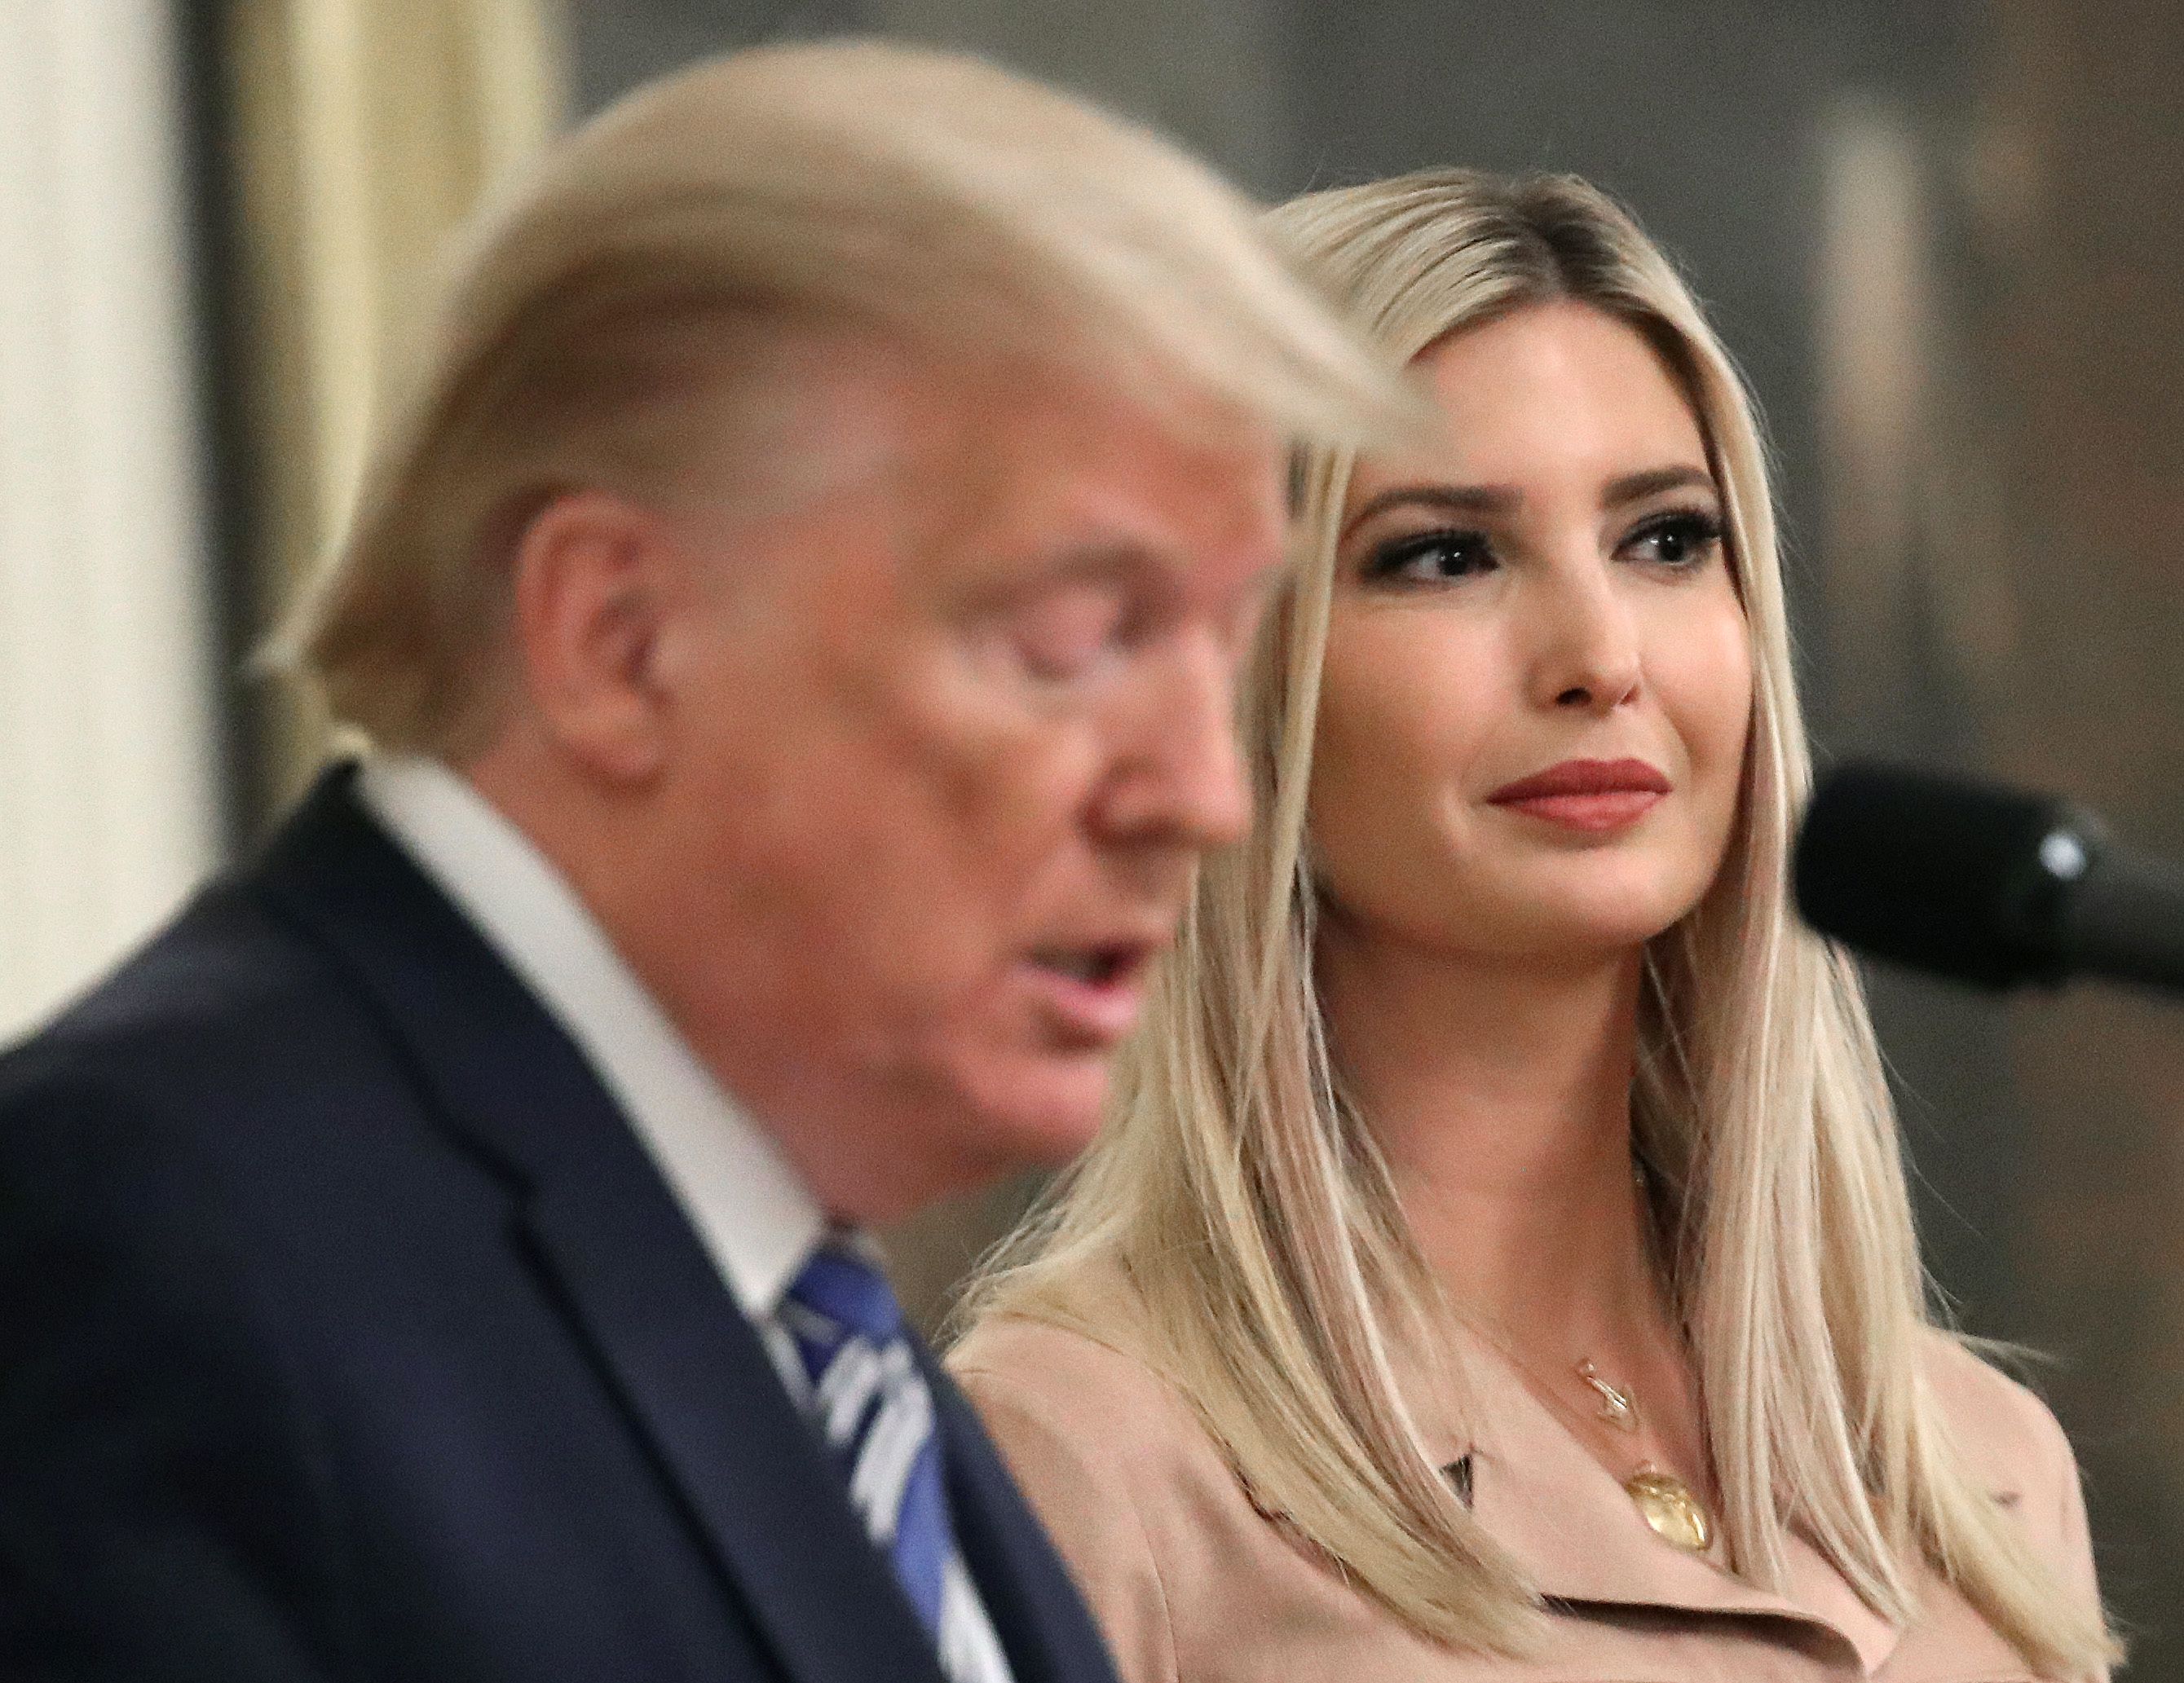 andrew fortenberry recommends ivanka trump revealing photos pic